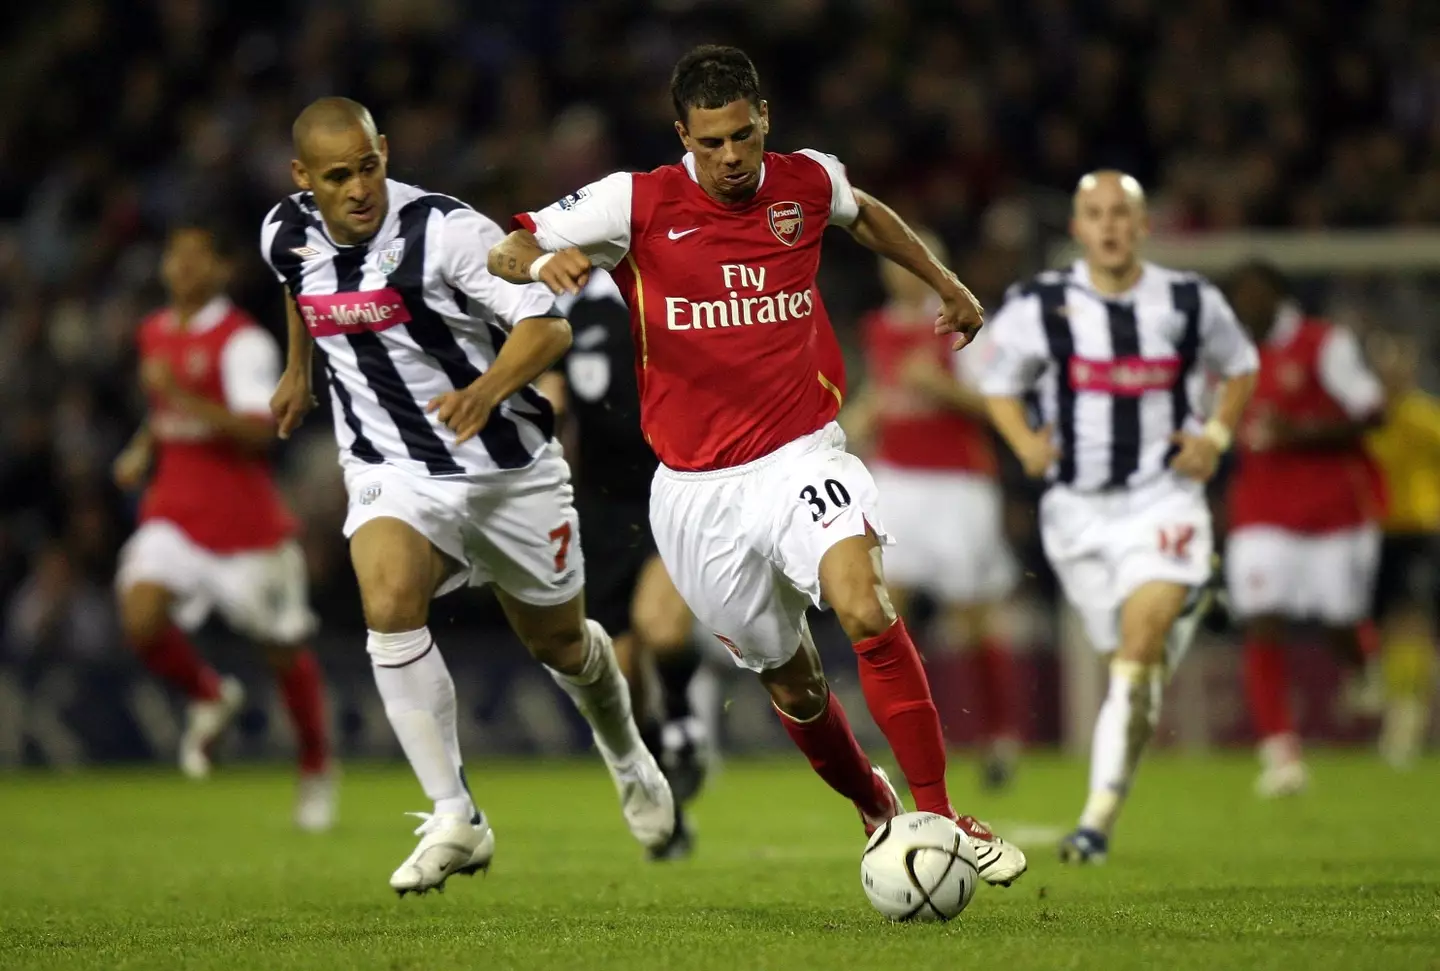 Jeremie Aliadiere had three separate loan spells during his time with Arsenal before he was sold in 2007.